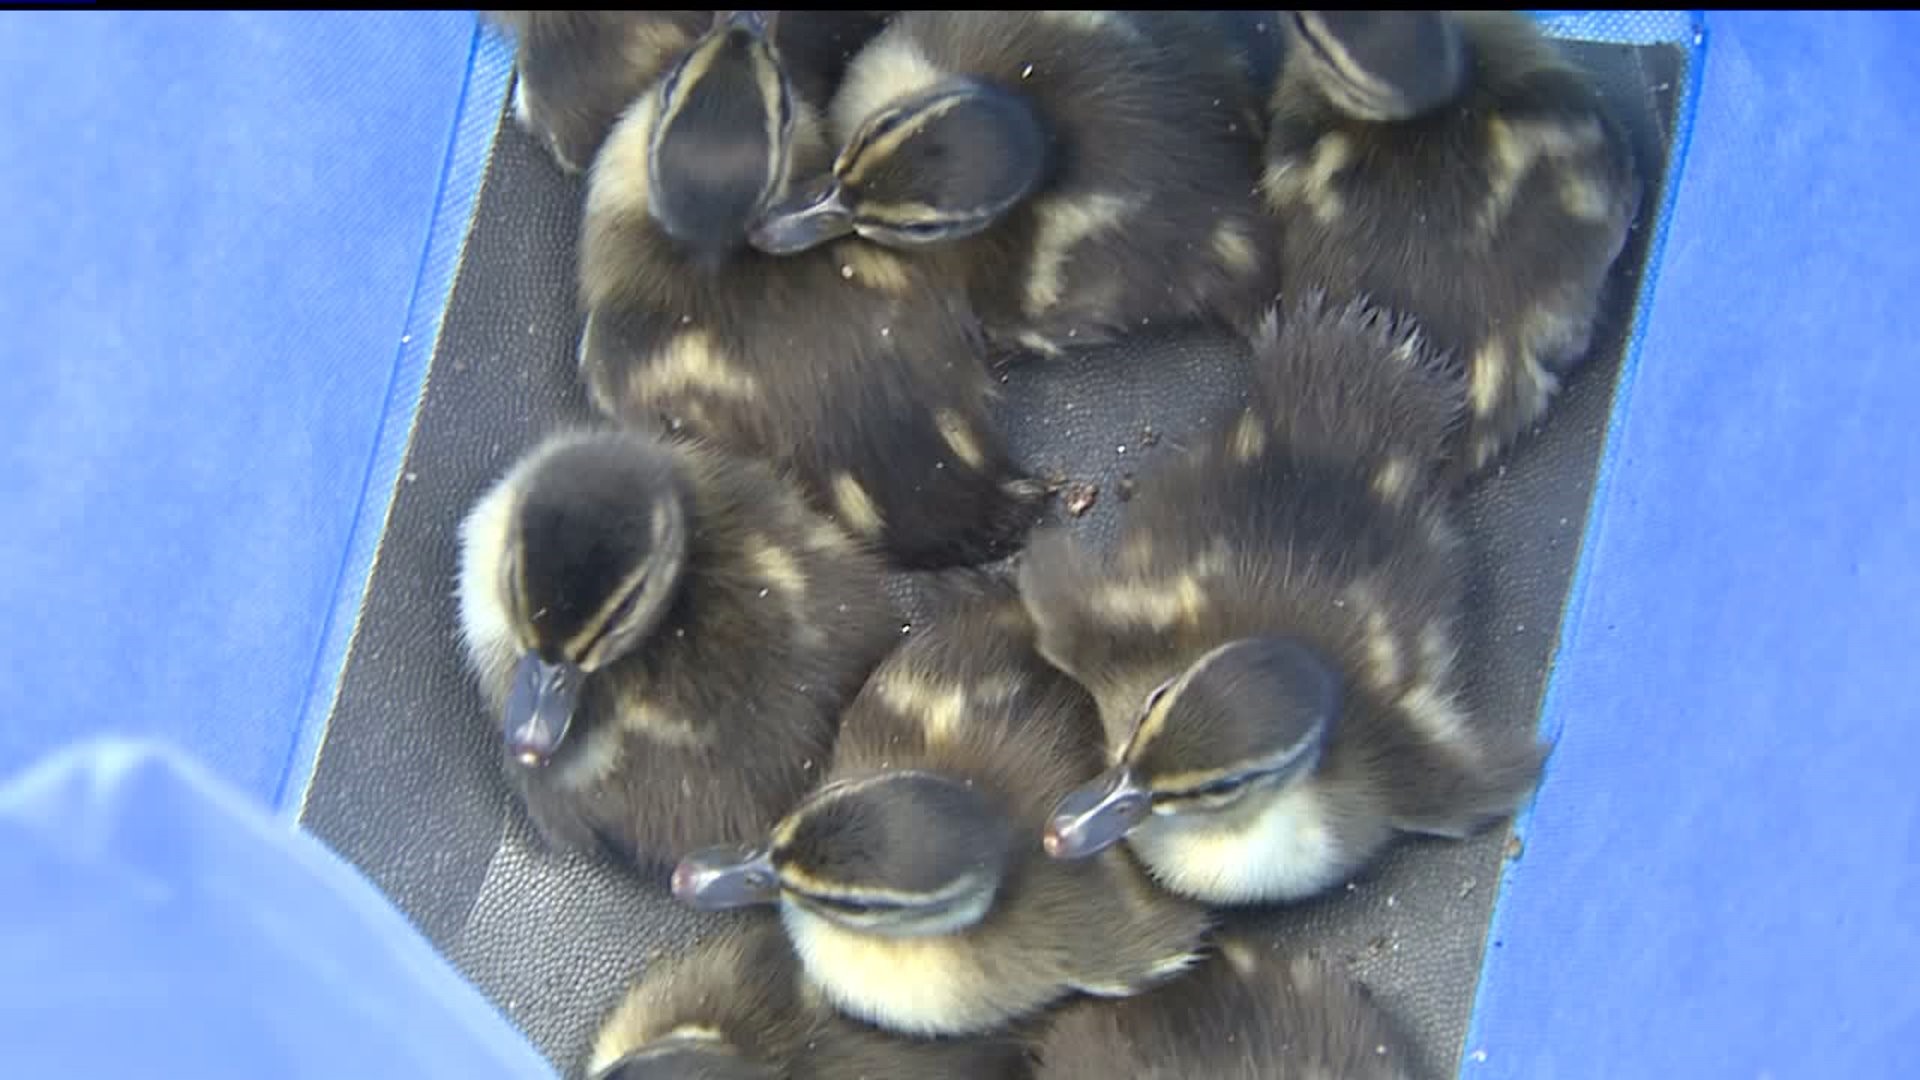 13 ducklings reunited with their mother after being rescued in York County